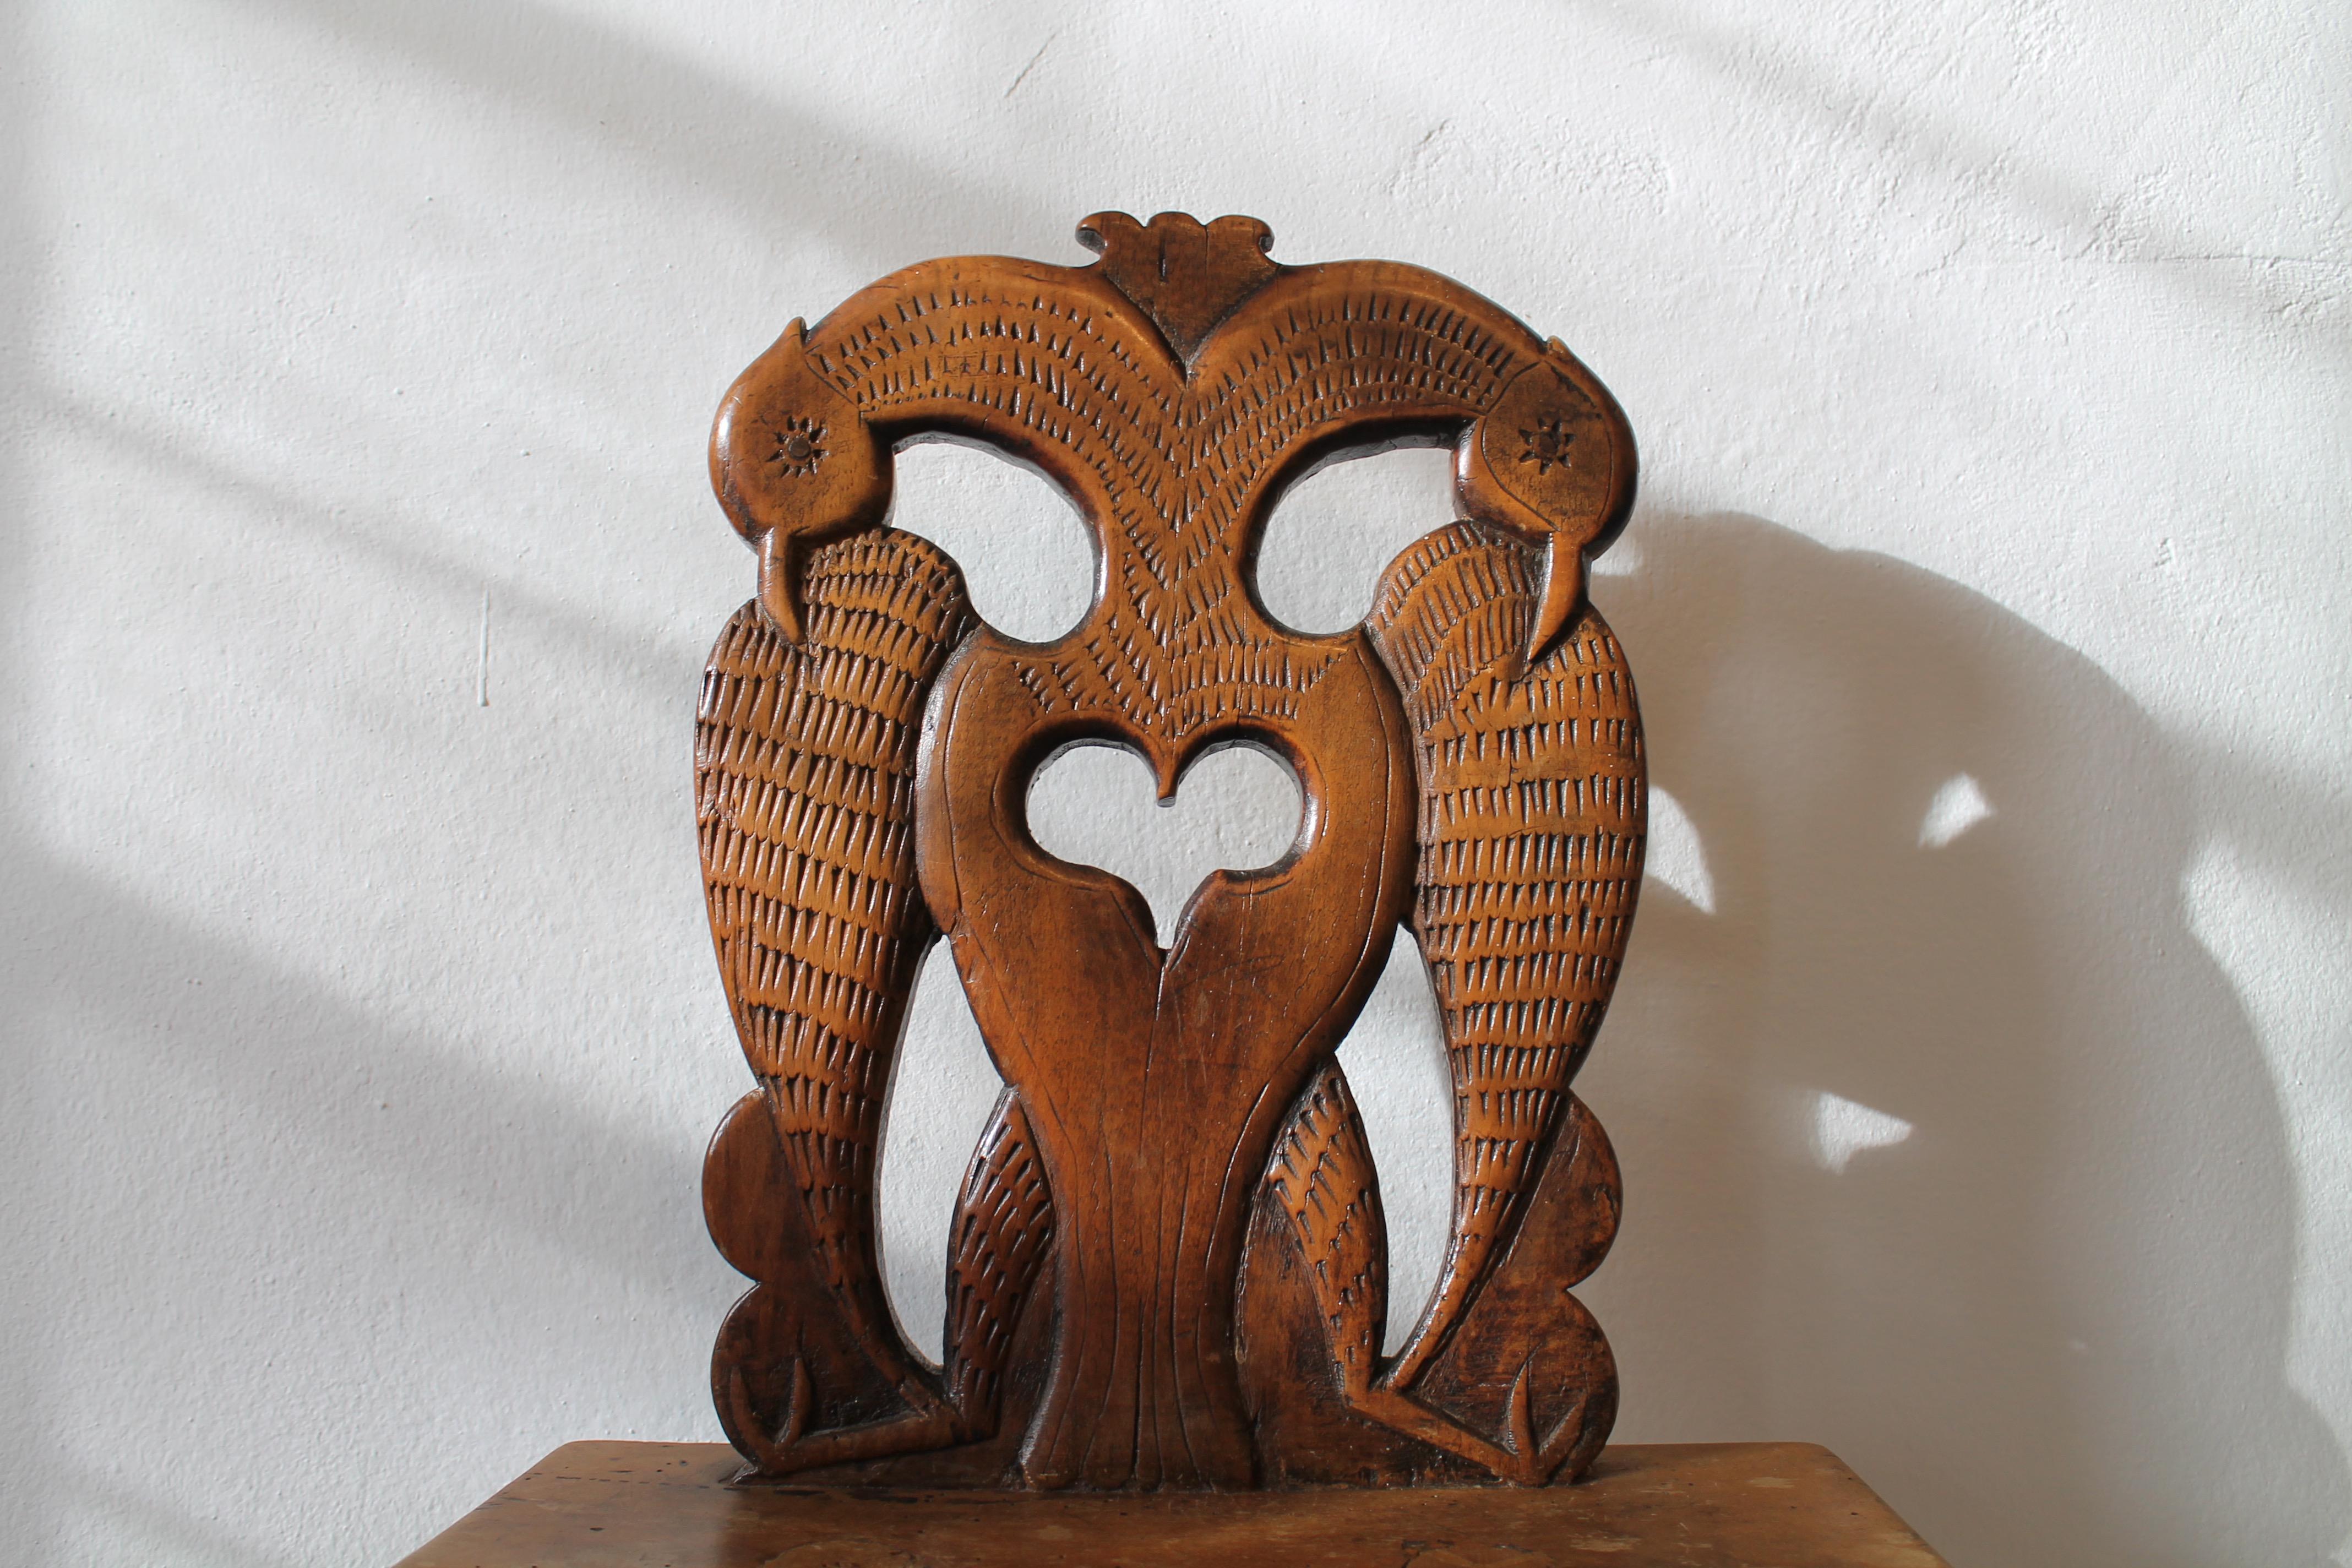 The present piece is an unusual board chair made of walnut from the Alpine region. It is not a simple peasant chair, as evidenced by the particularly ornately carved birds that adorn the backrest. The chair was made in the 18th century in Bavaria or